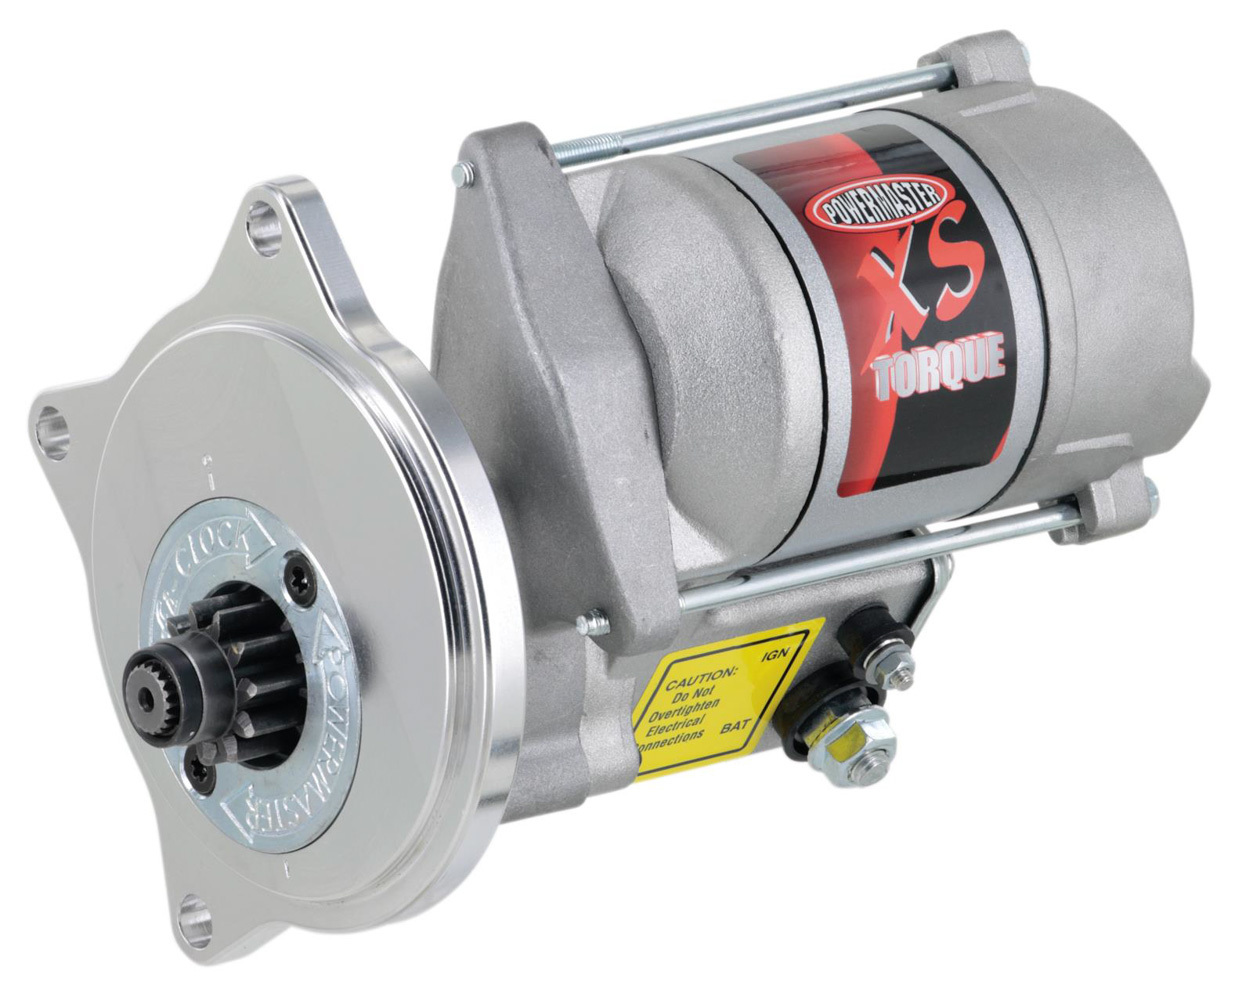 Powermaster Performance 9506M - Starter, XS Torque, 4.4:1 Gear Reduction, Natural, Ford FE-Series, Each